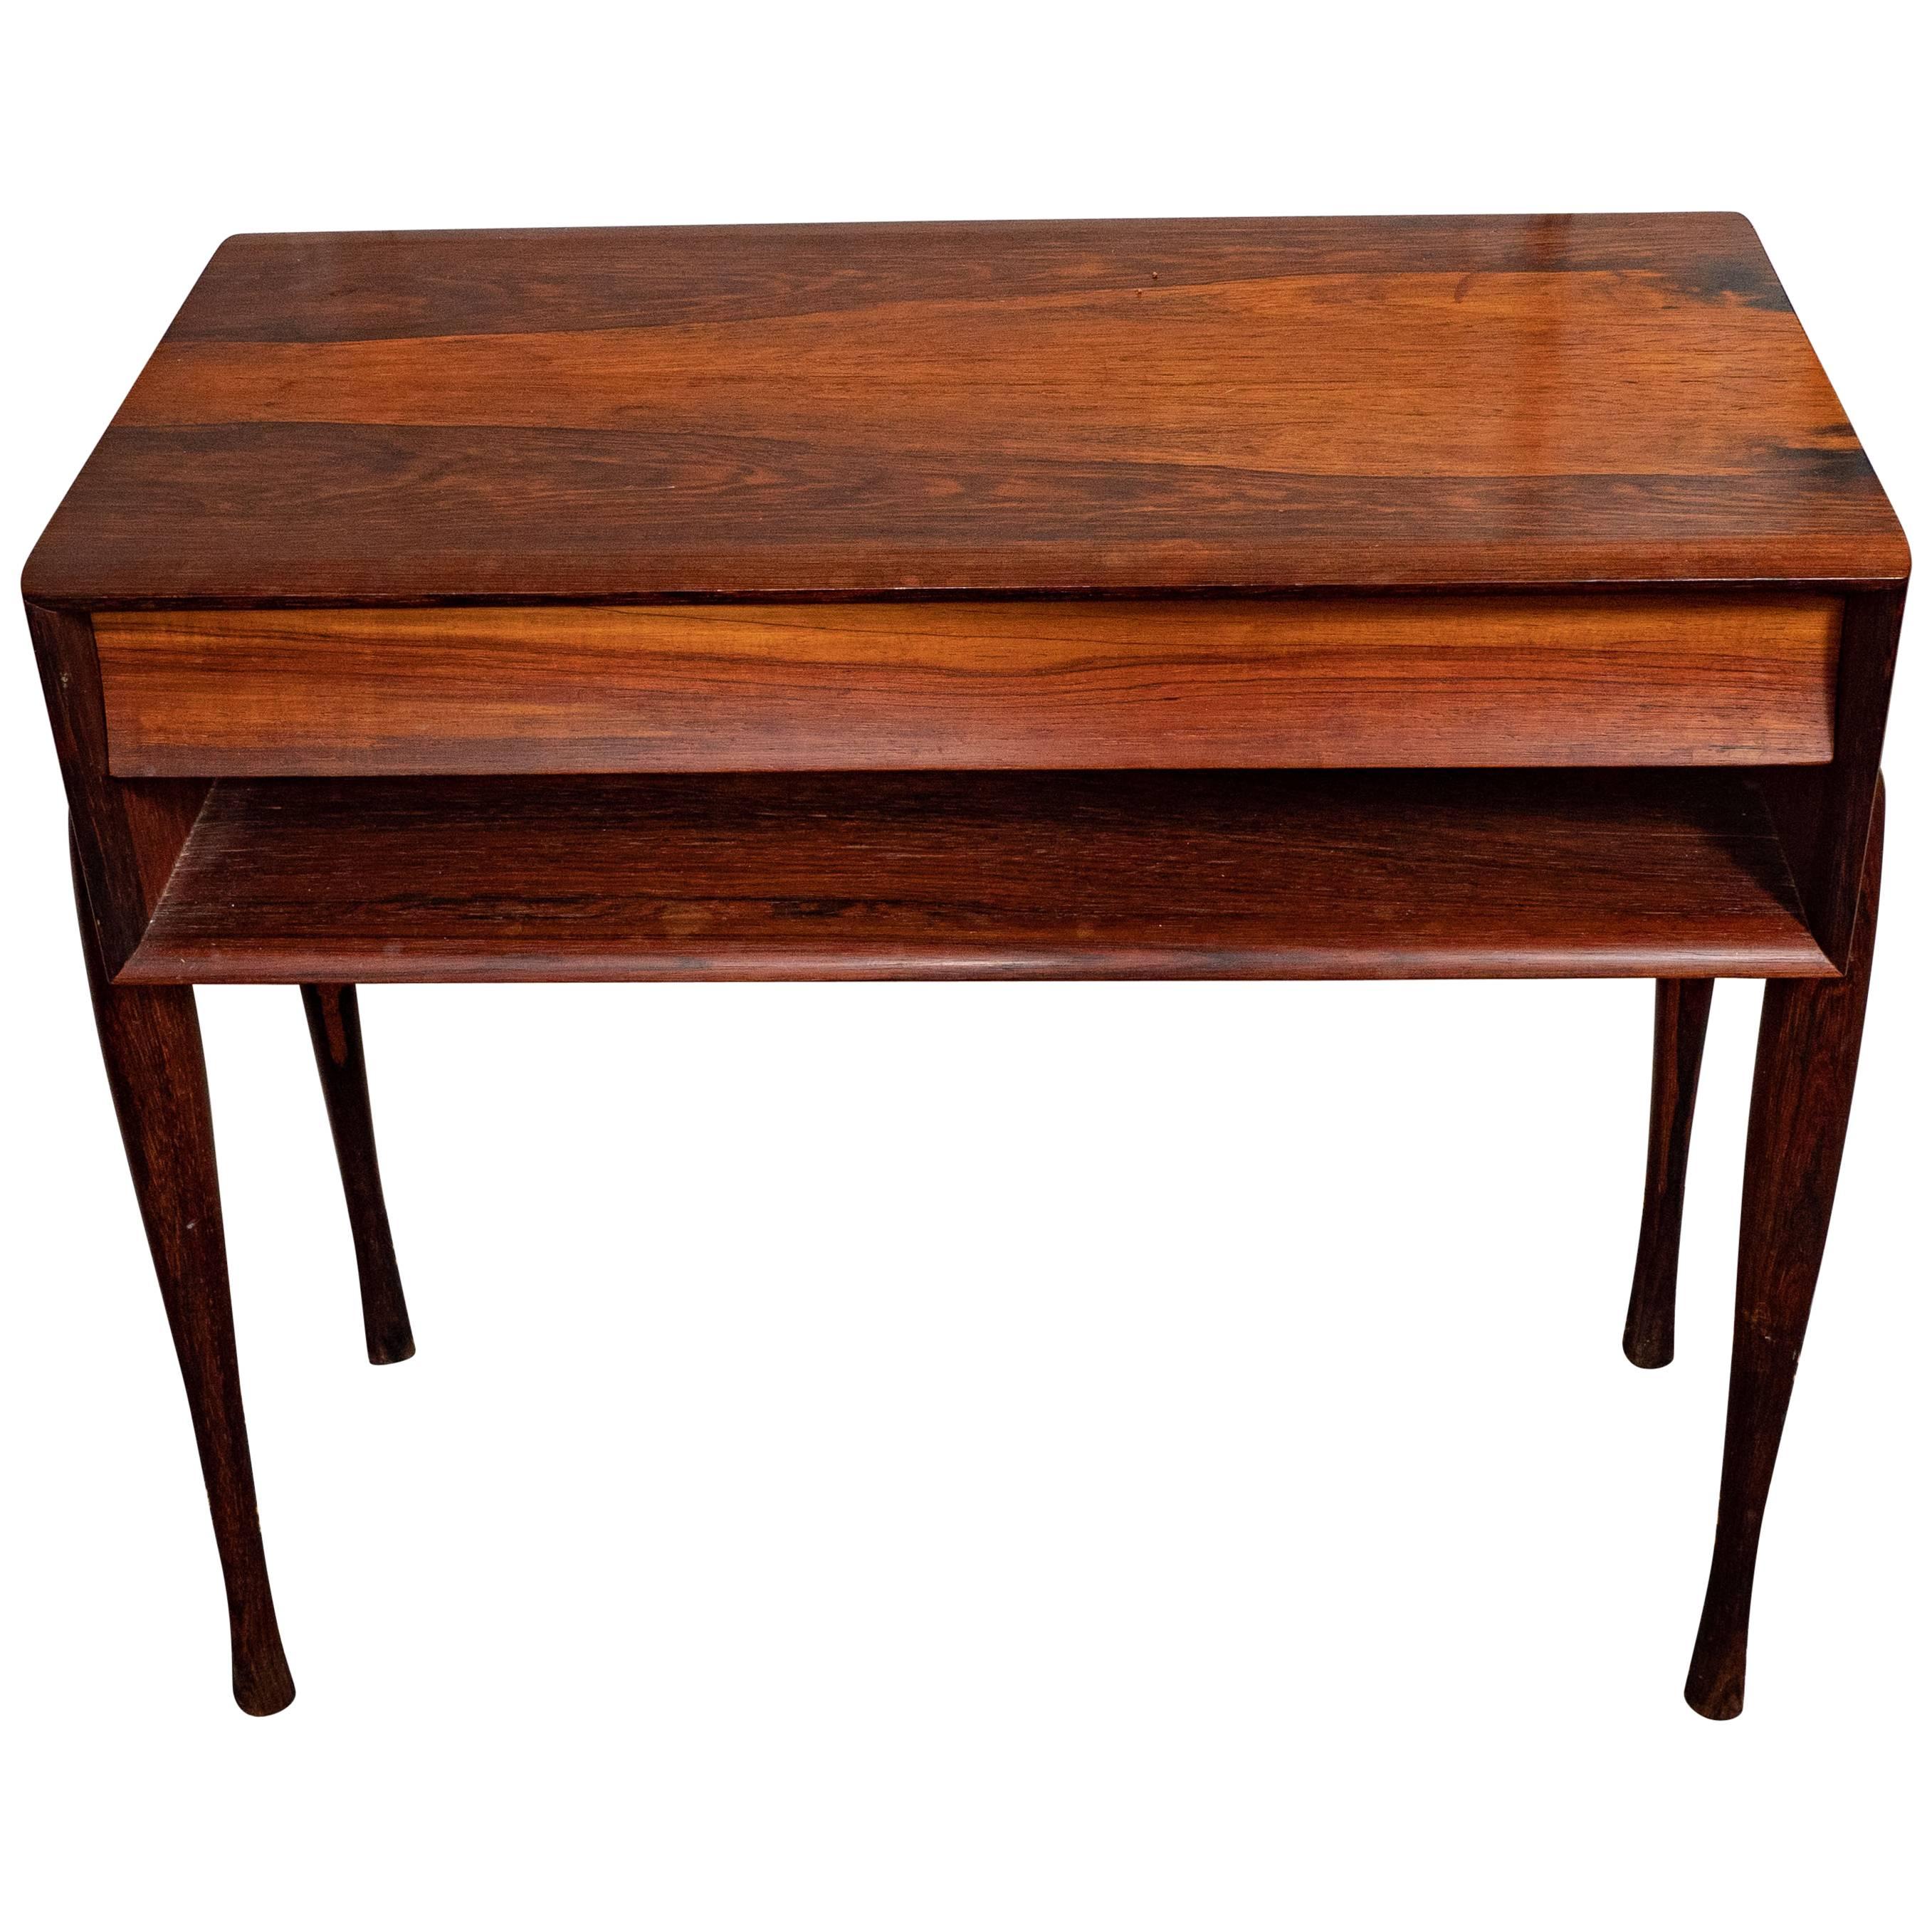 Midcentury Rosewood Side Table with Shelf, circa 1960